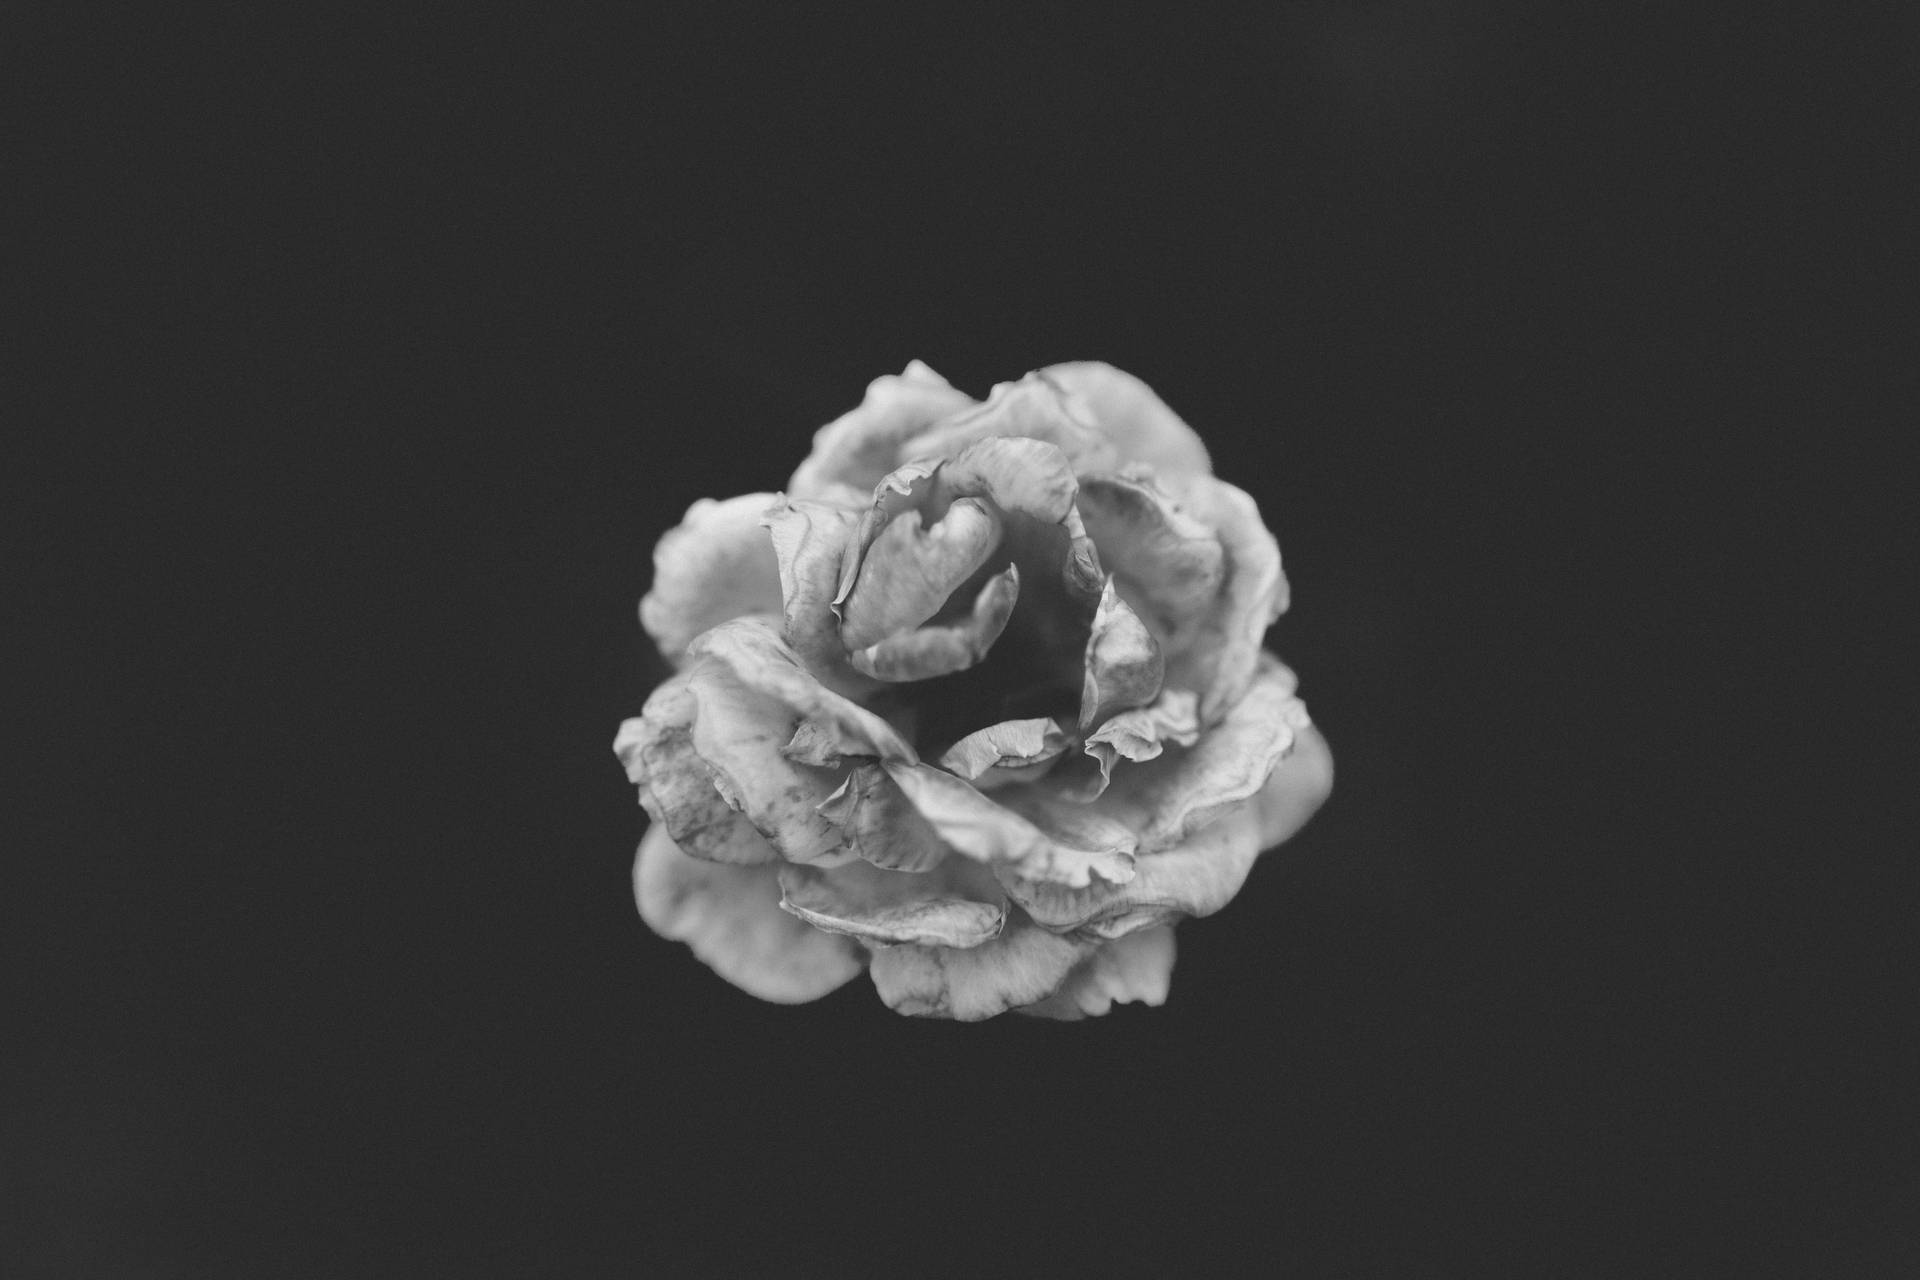 5616X3744 Black Rose Wallpaper and Background